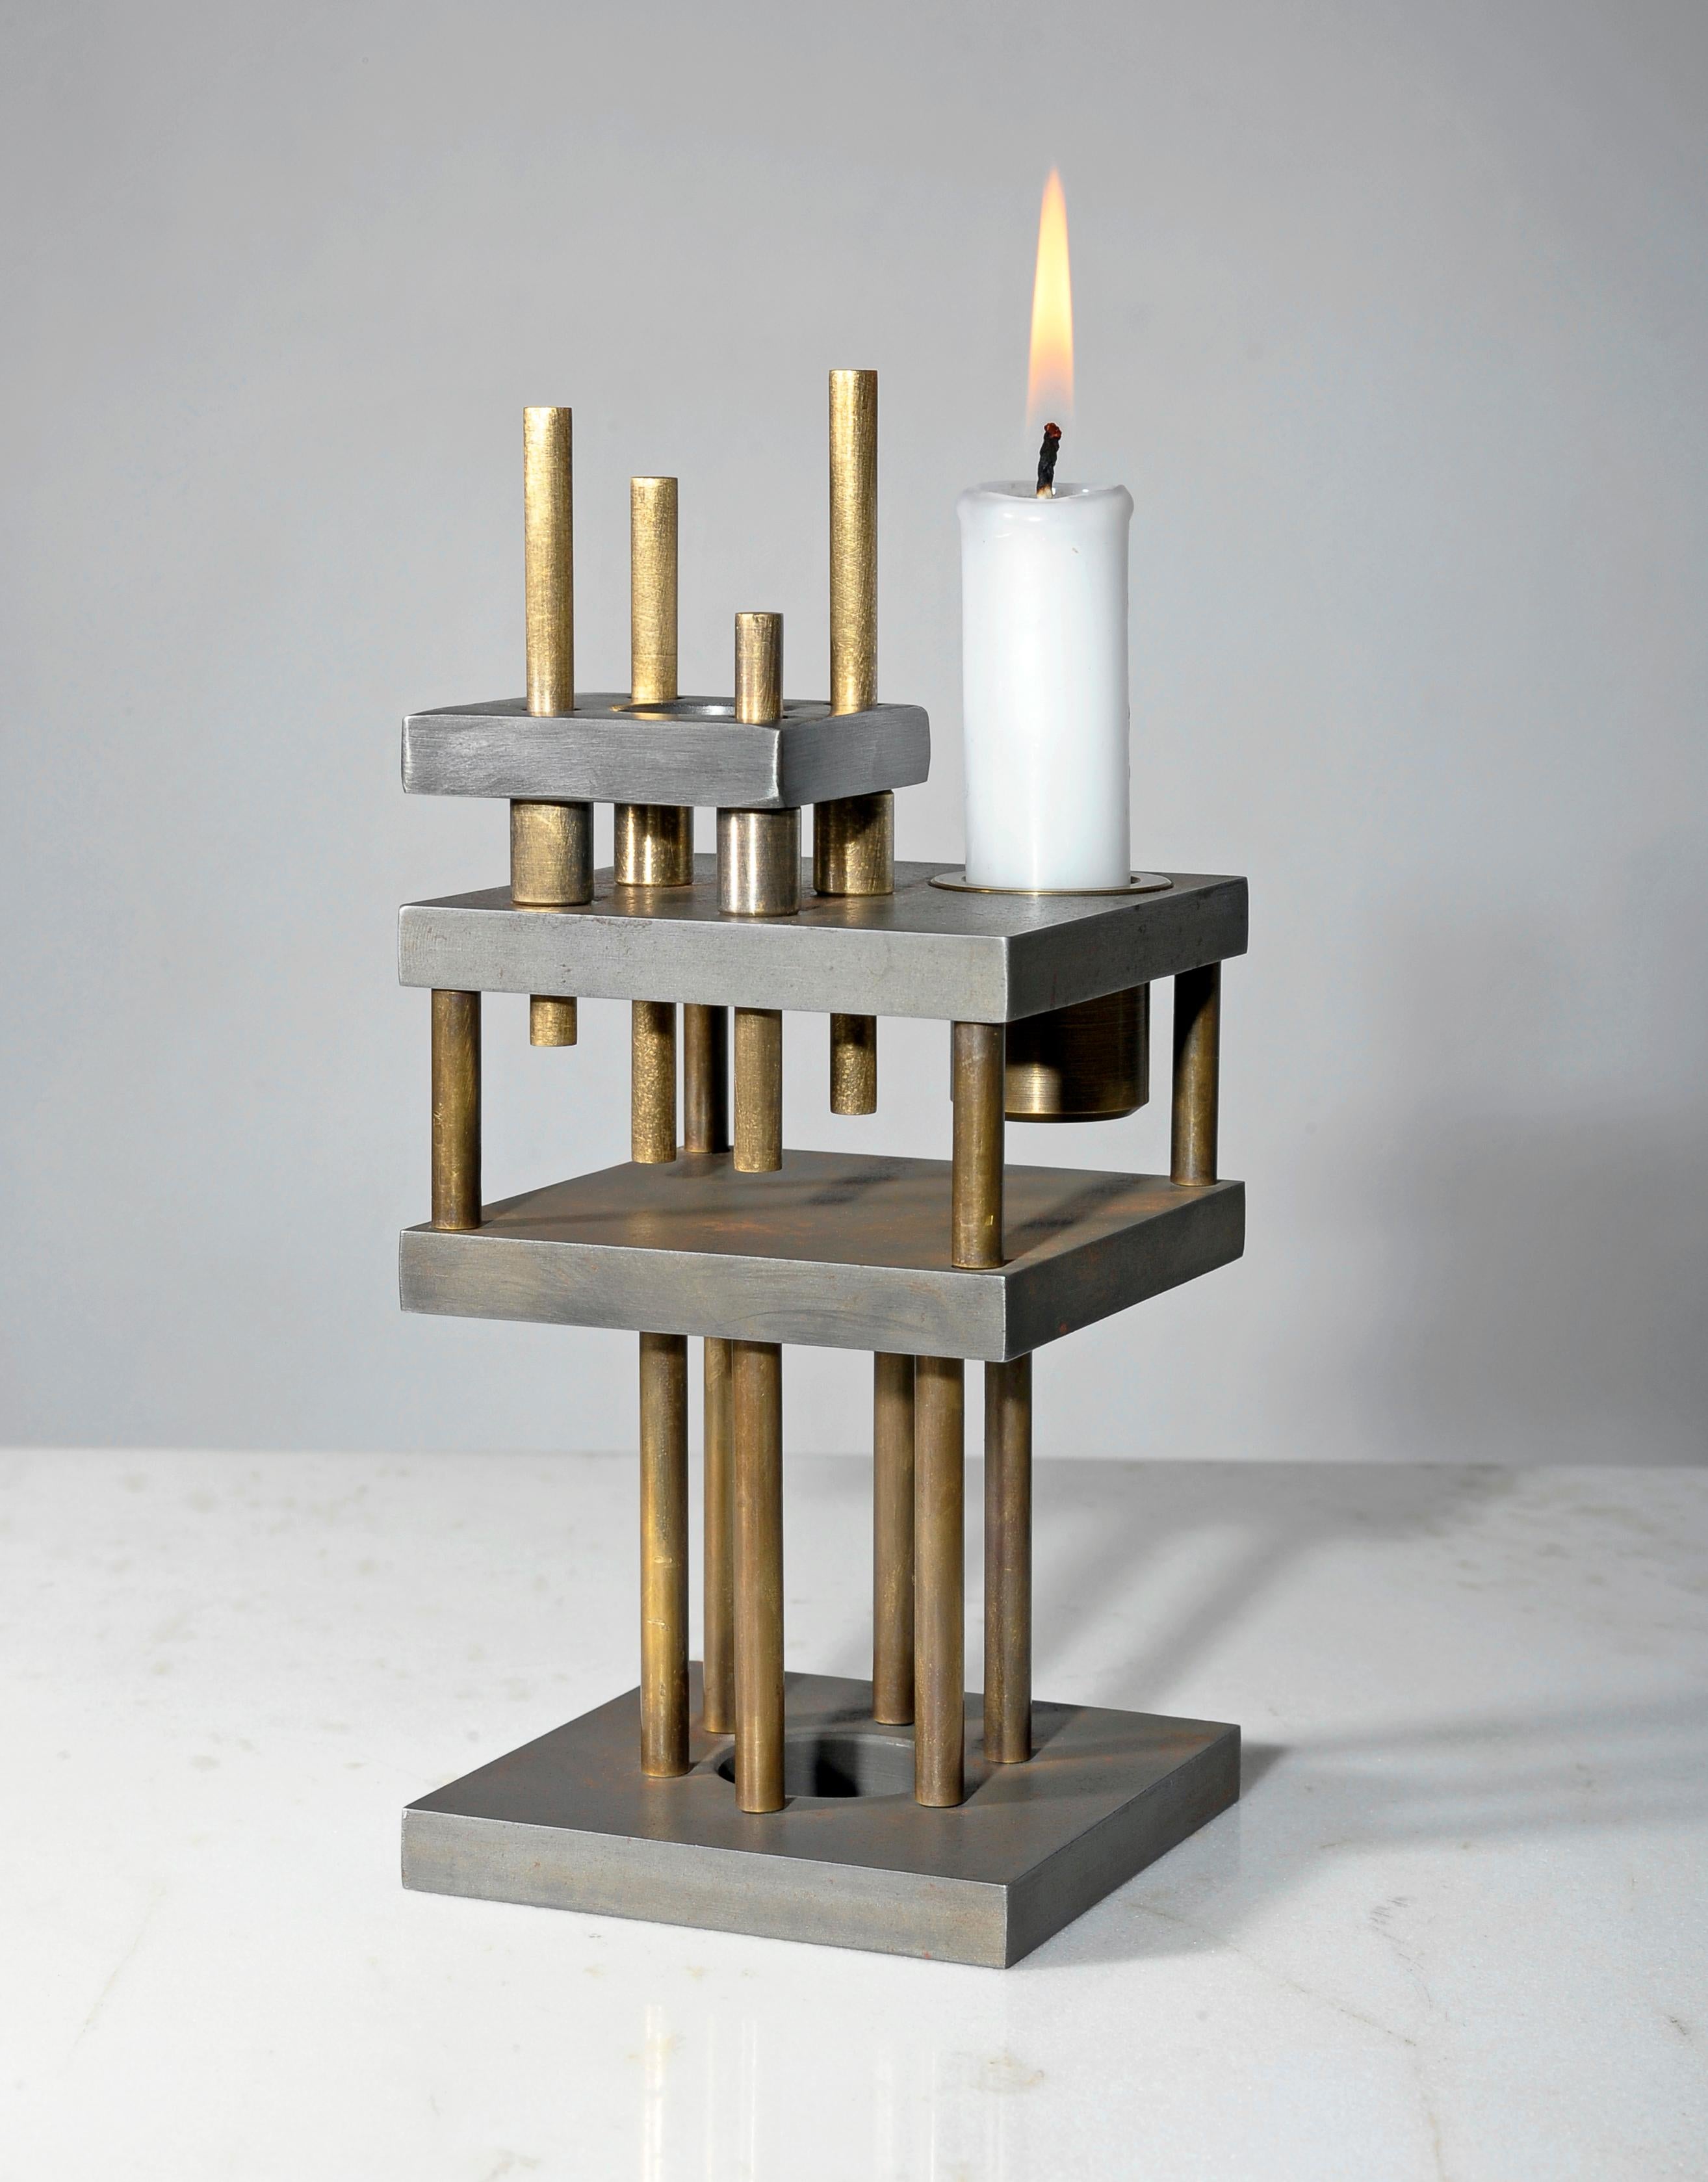 European Unique Steel and Brass Candleholder “Brut”, Signed by Lukasz Friedrich For Sale